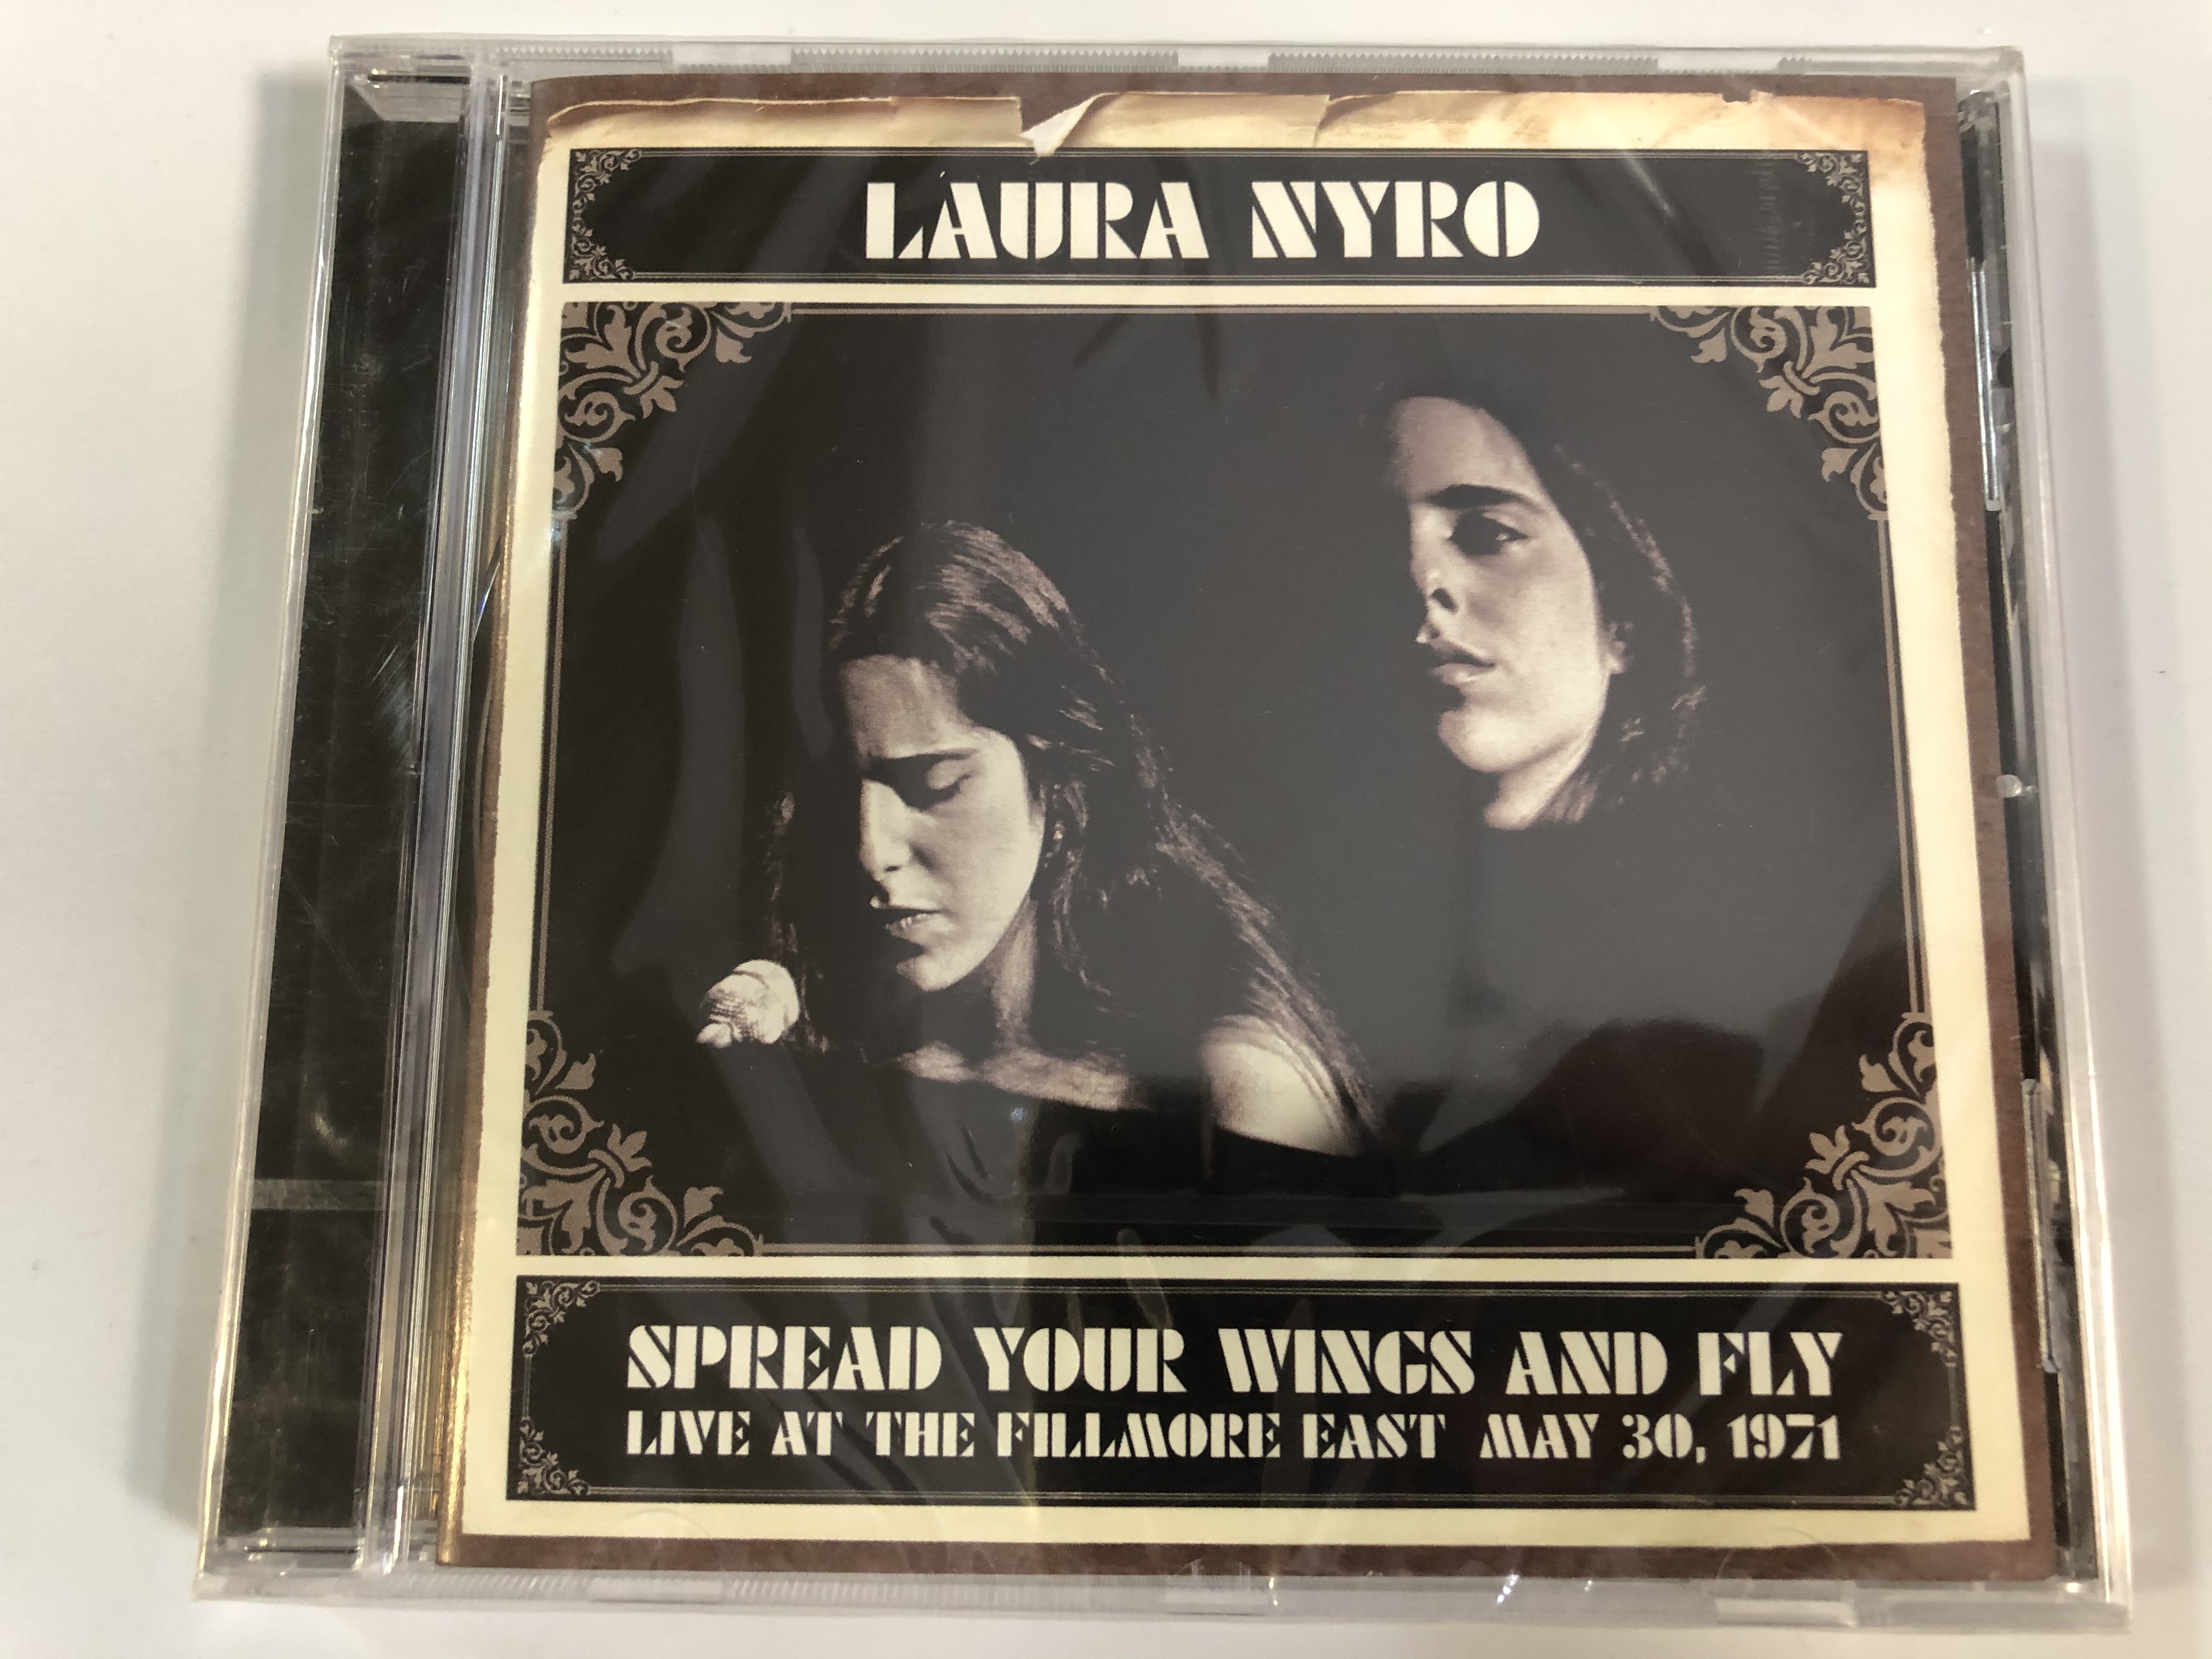 laura-nyro-spread-your-wings-and-fly-live-at-the-fillmore-east-may-30-1971-columbia-audio-cd-col-515209-2-1-.jpg